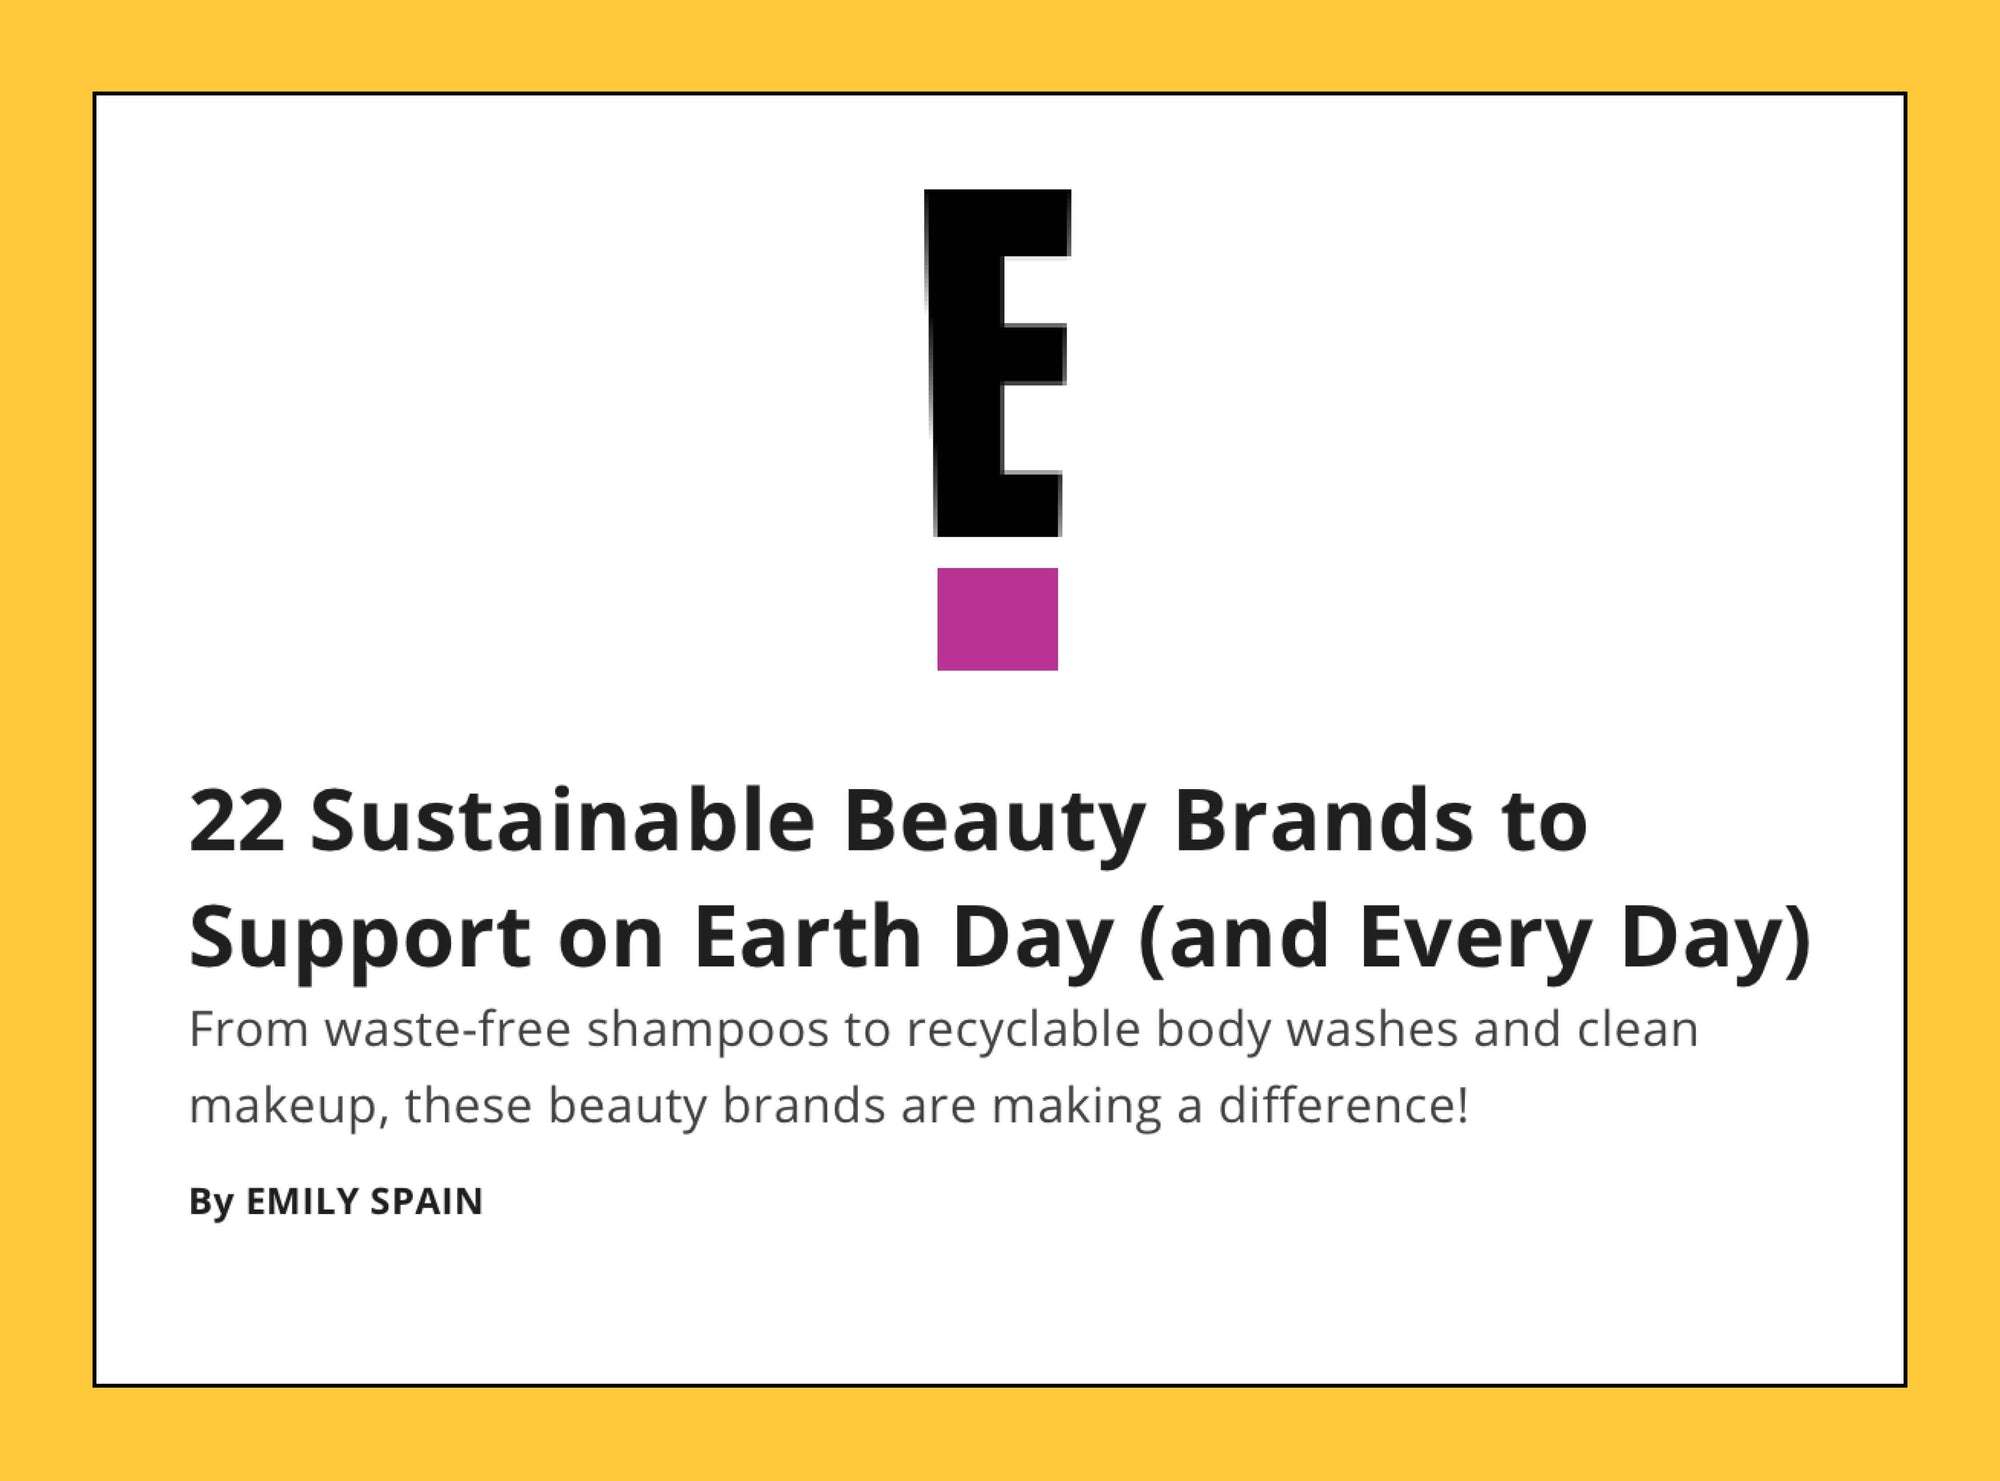 Kadalys is featured as a Sustainable Beauty Brand to Support on Earth Day (and Every Day)